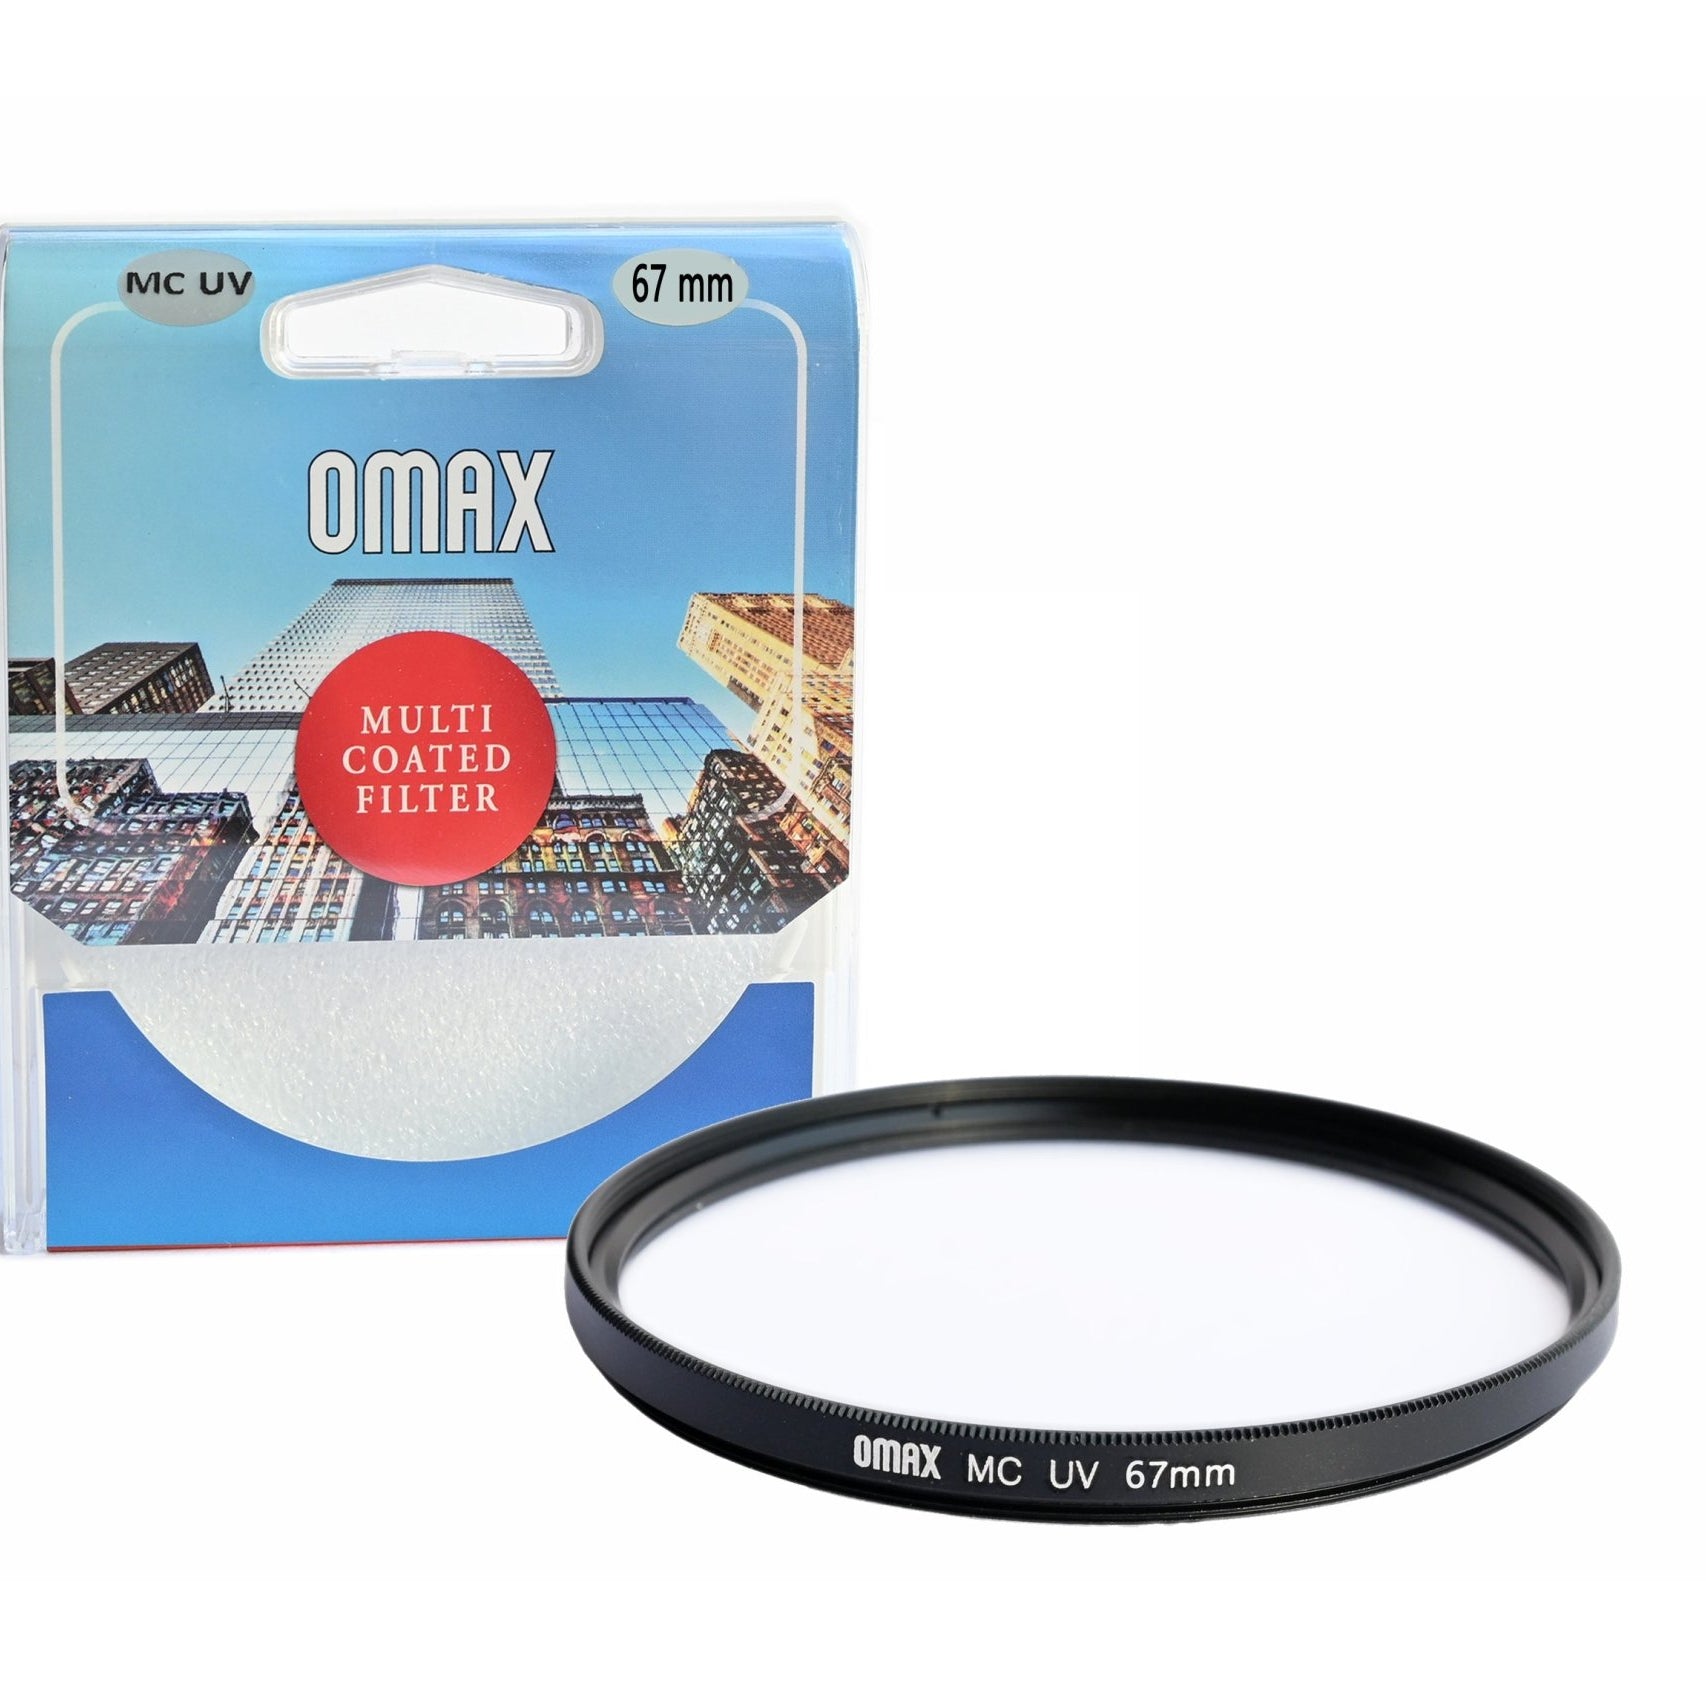 Omax 67mm Multi-Coated UV Filter for Canon EF-S 18-135mm f/3.5-5.6 IS STM Lens - The Camerashop